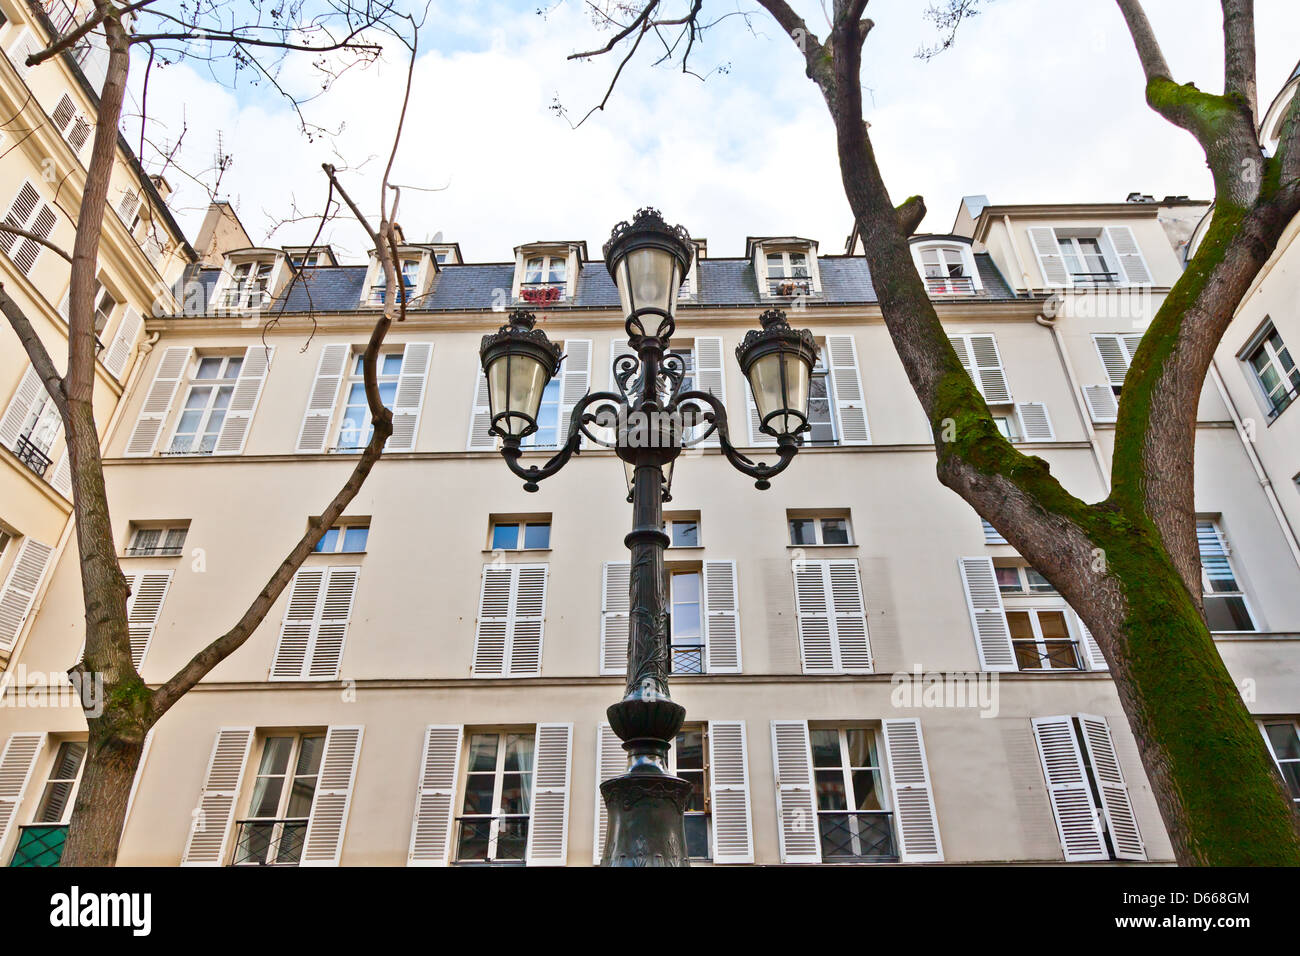 The place de Furstenberg, where Delacroix decided to live, is famous as one of the most charming squares in Paris. Stock Photo